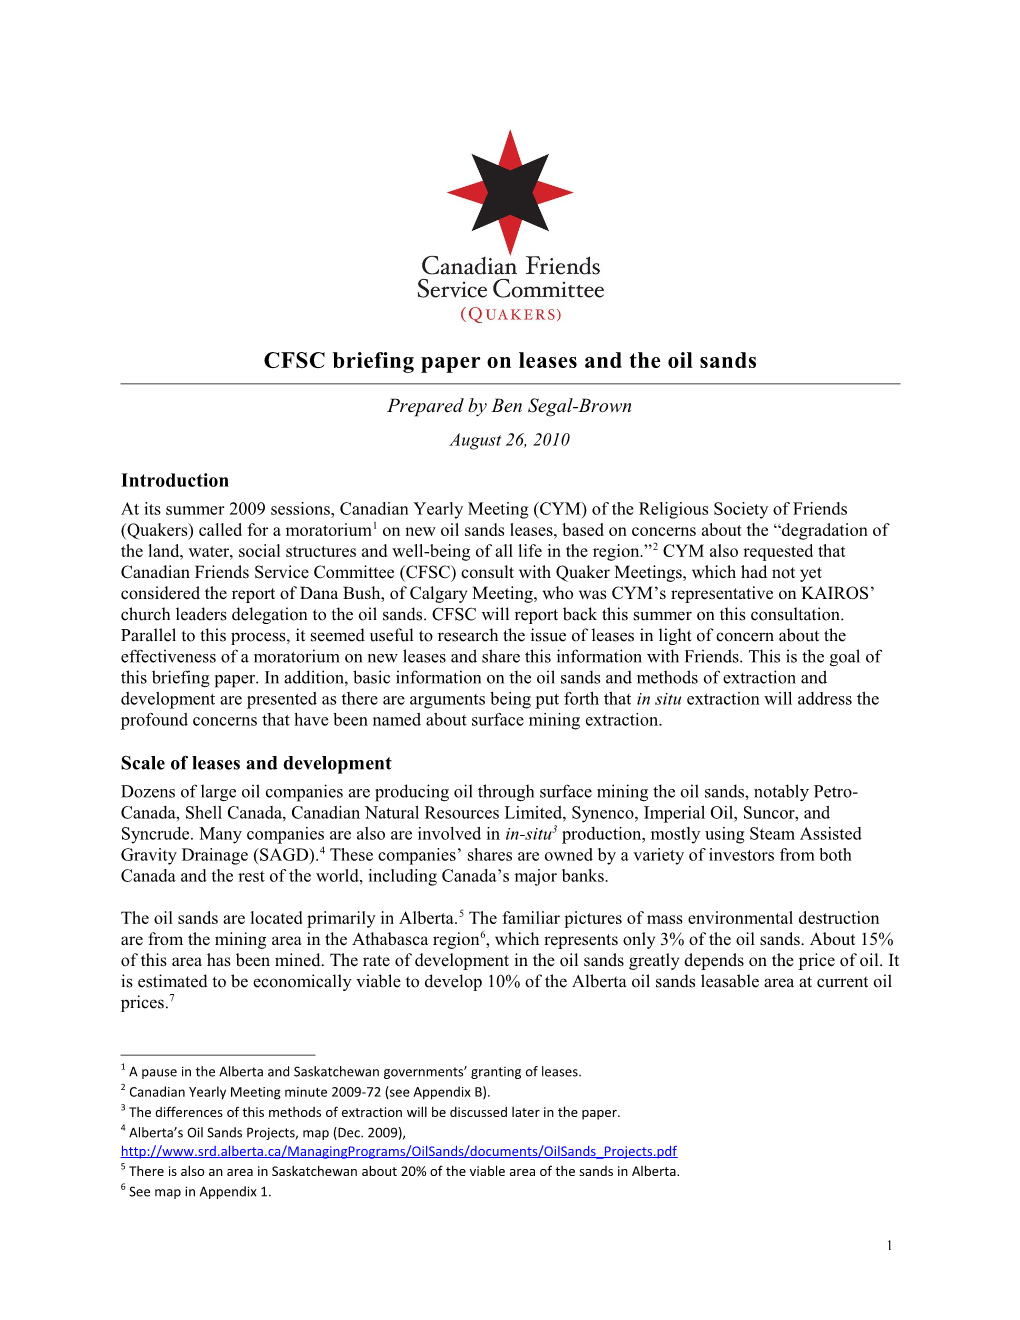 CFSC Briefing Paper on Leases and the Oil Sands